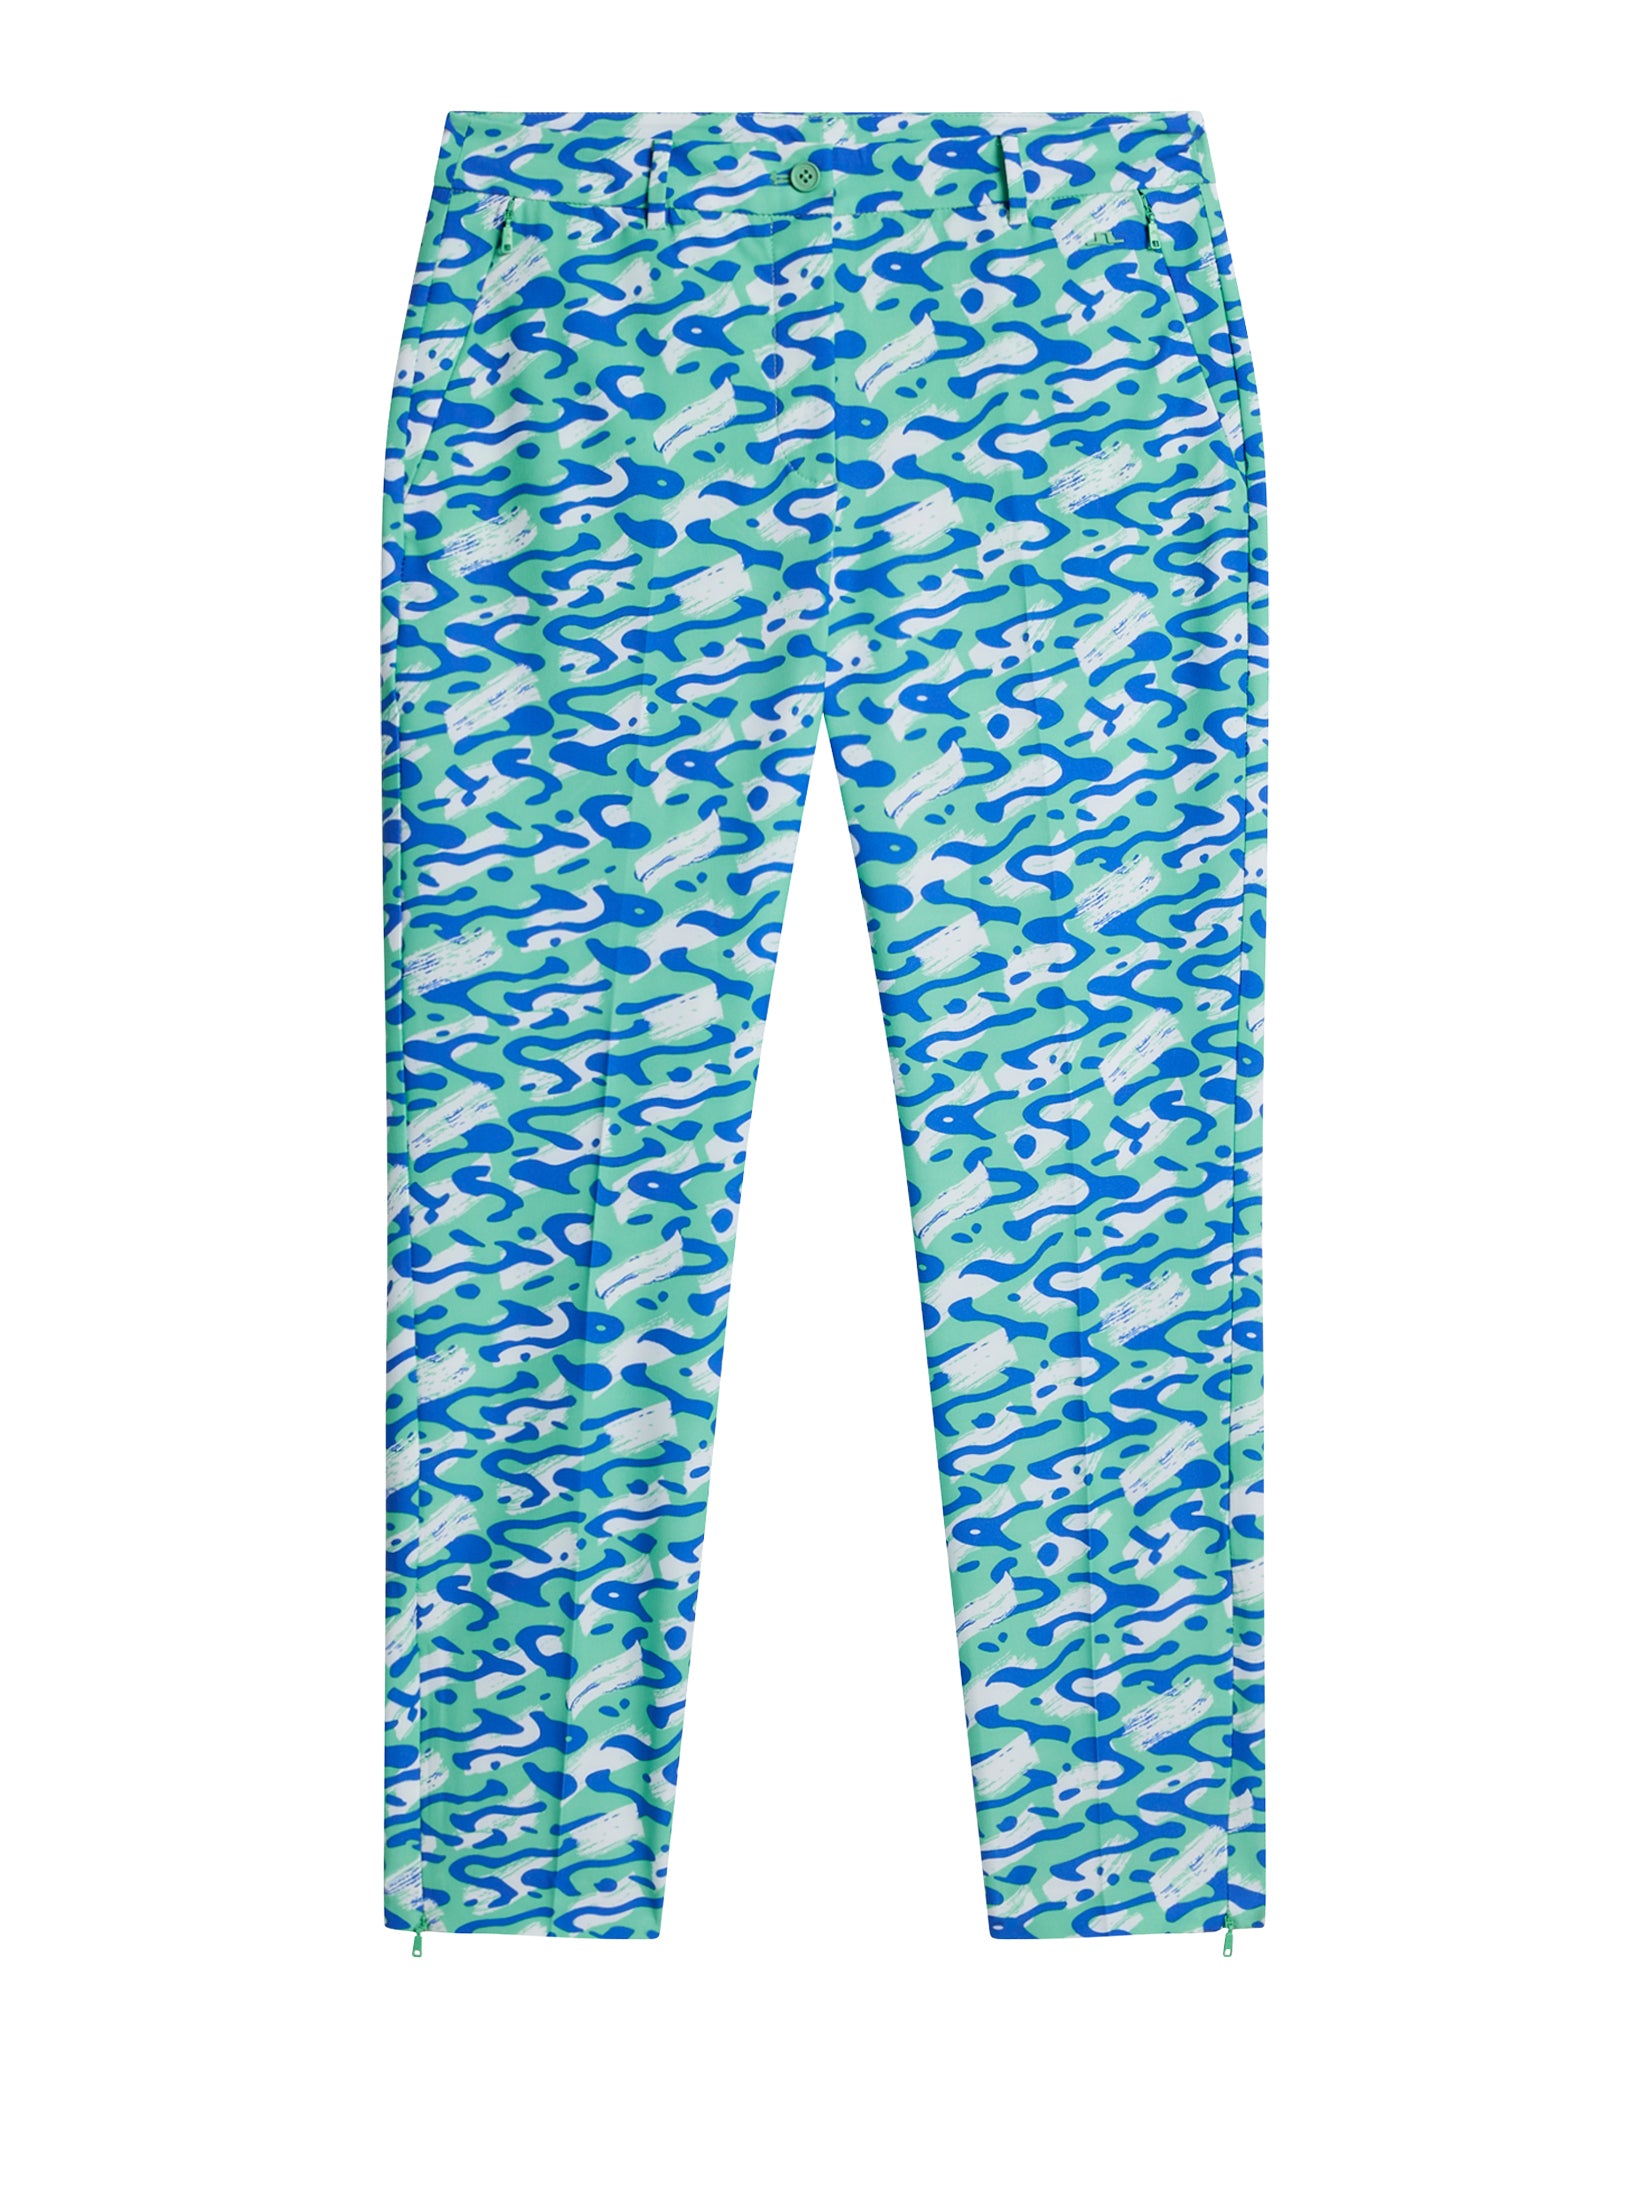 Stromberg Womens AOP Print Jazzy Legging Golf Trousers just £19.99